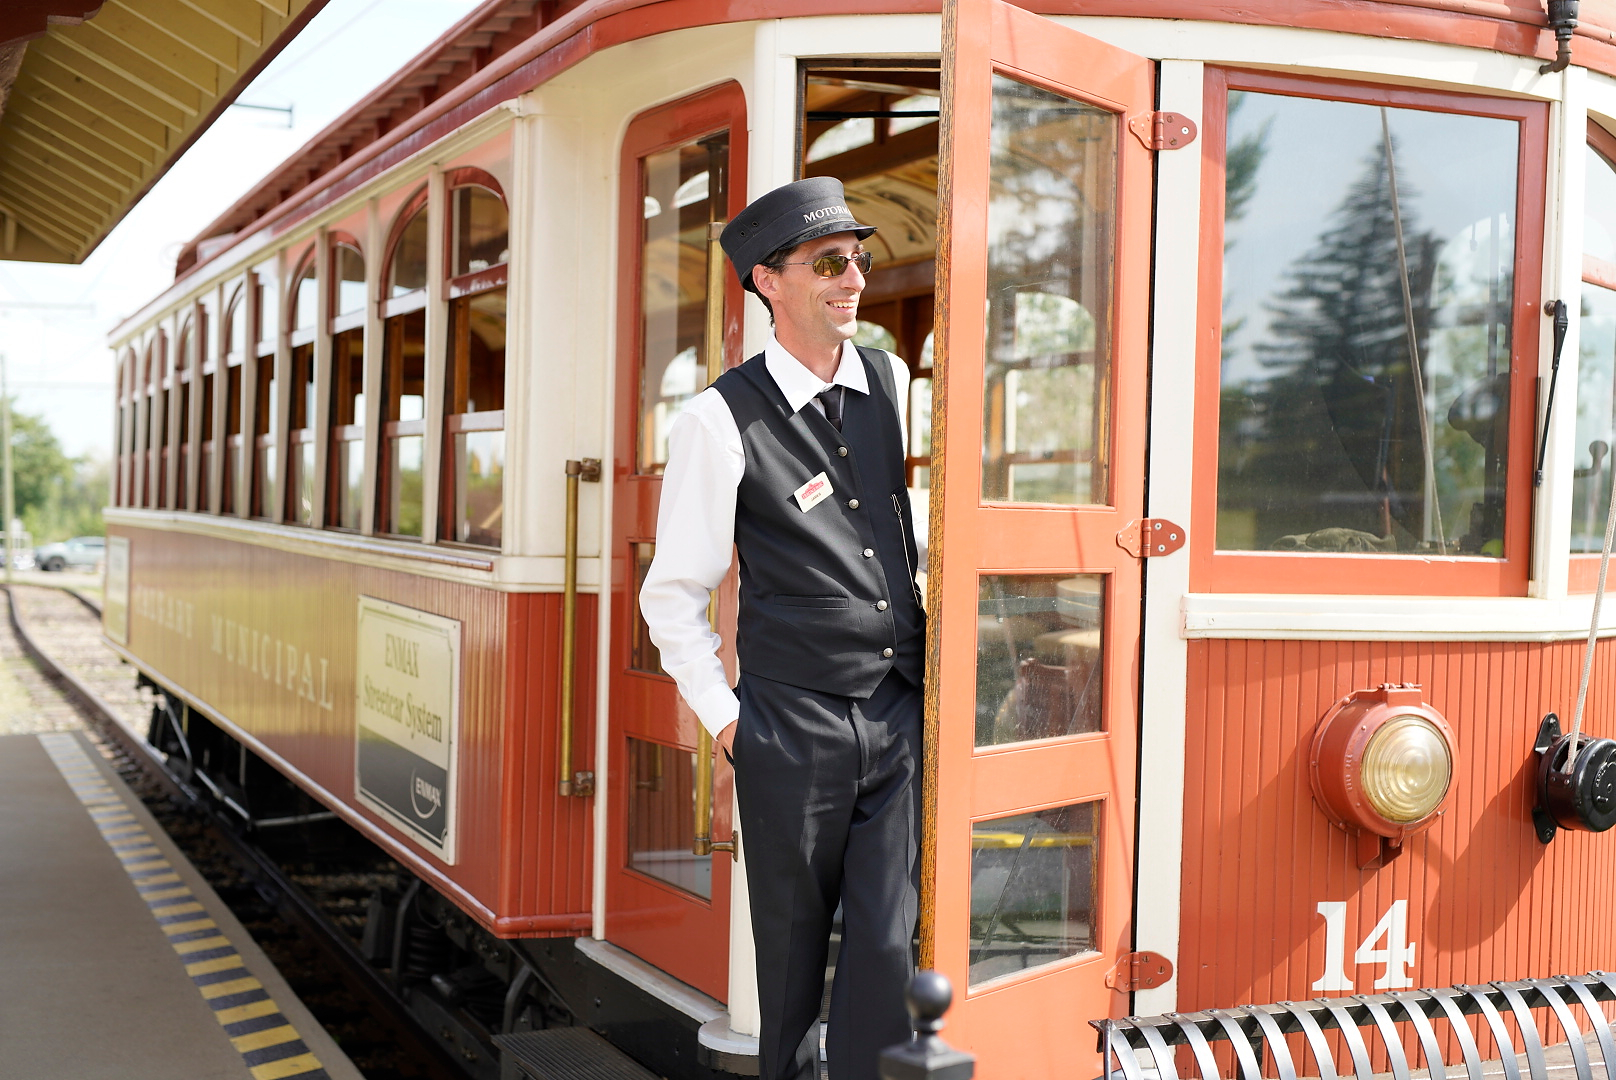 Man standing next to the streetcar at Heritage Park